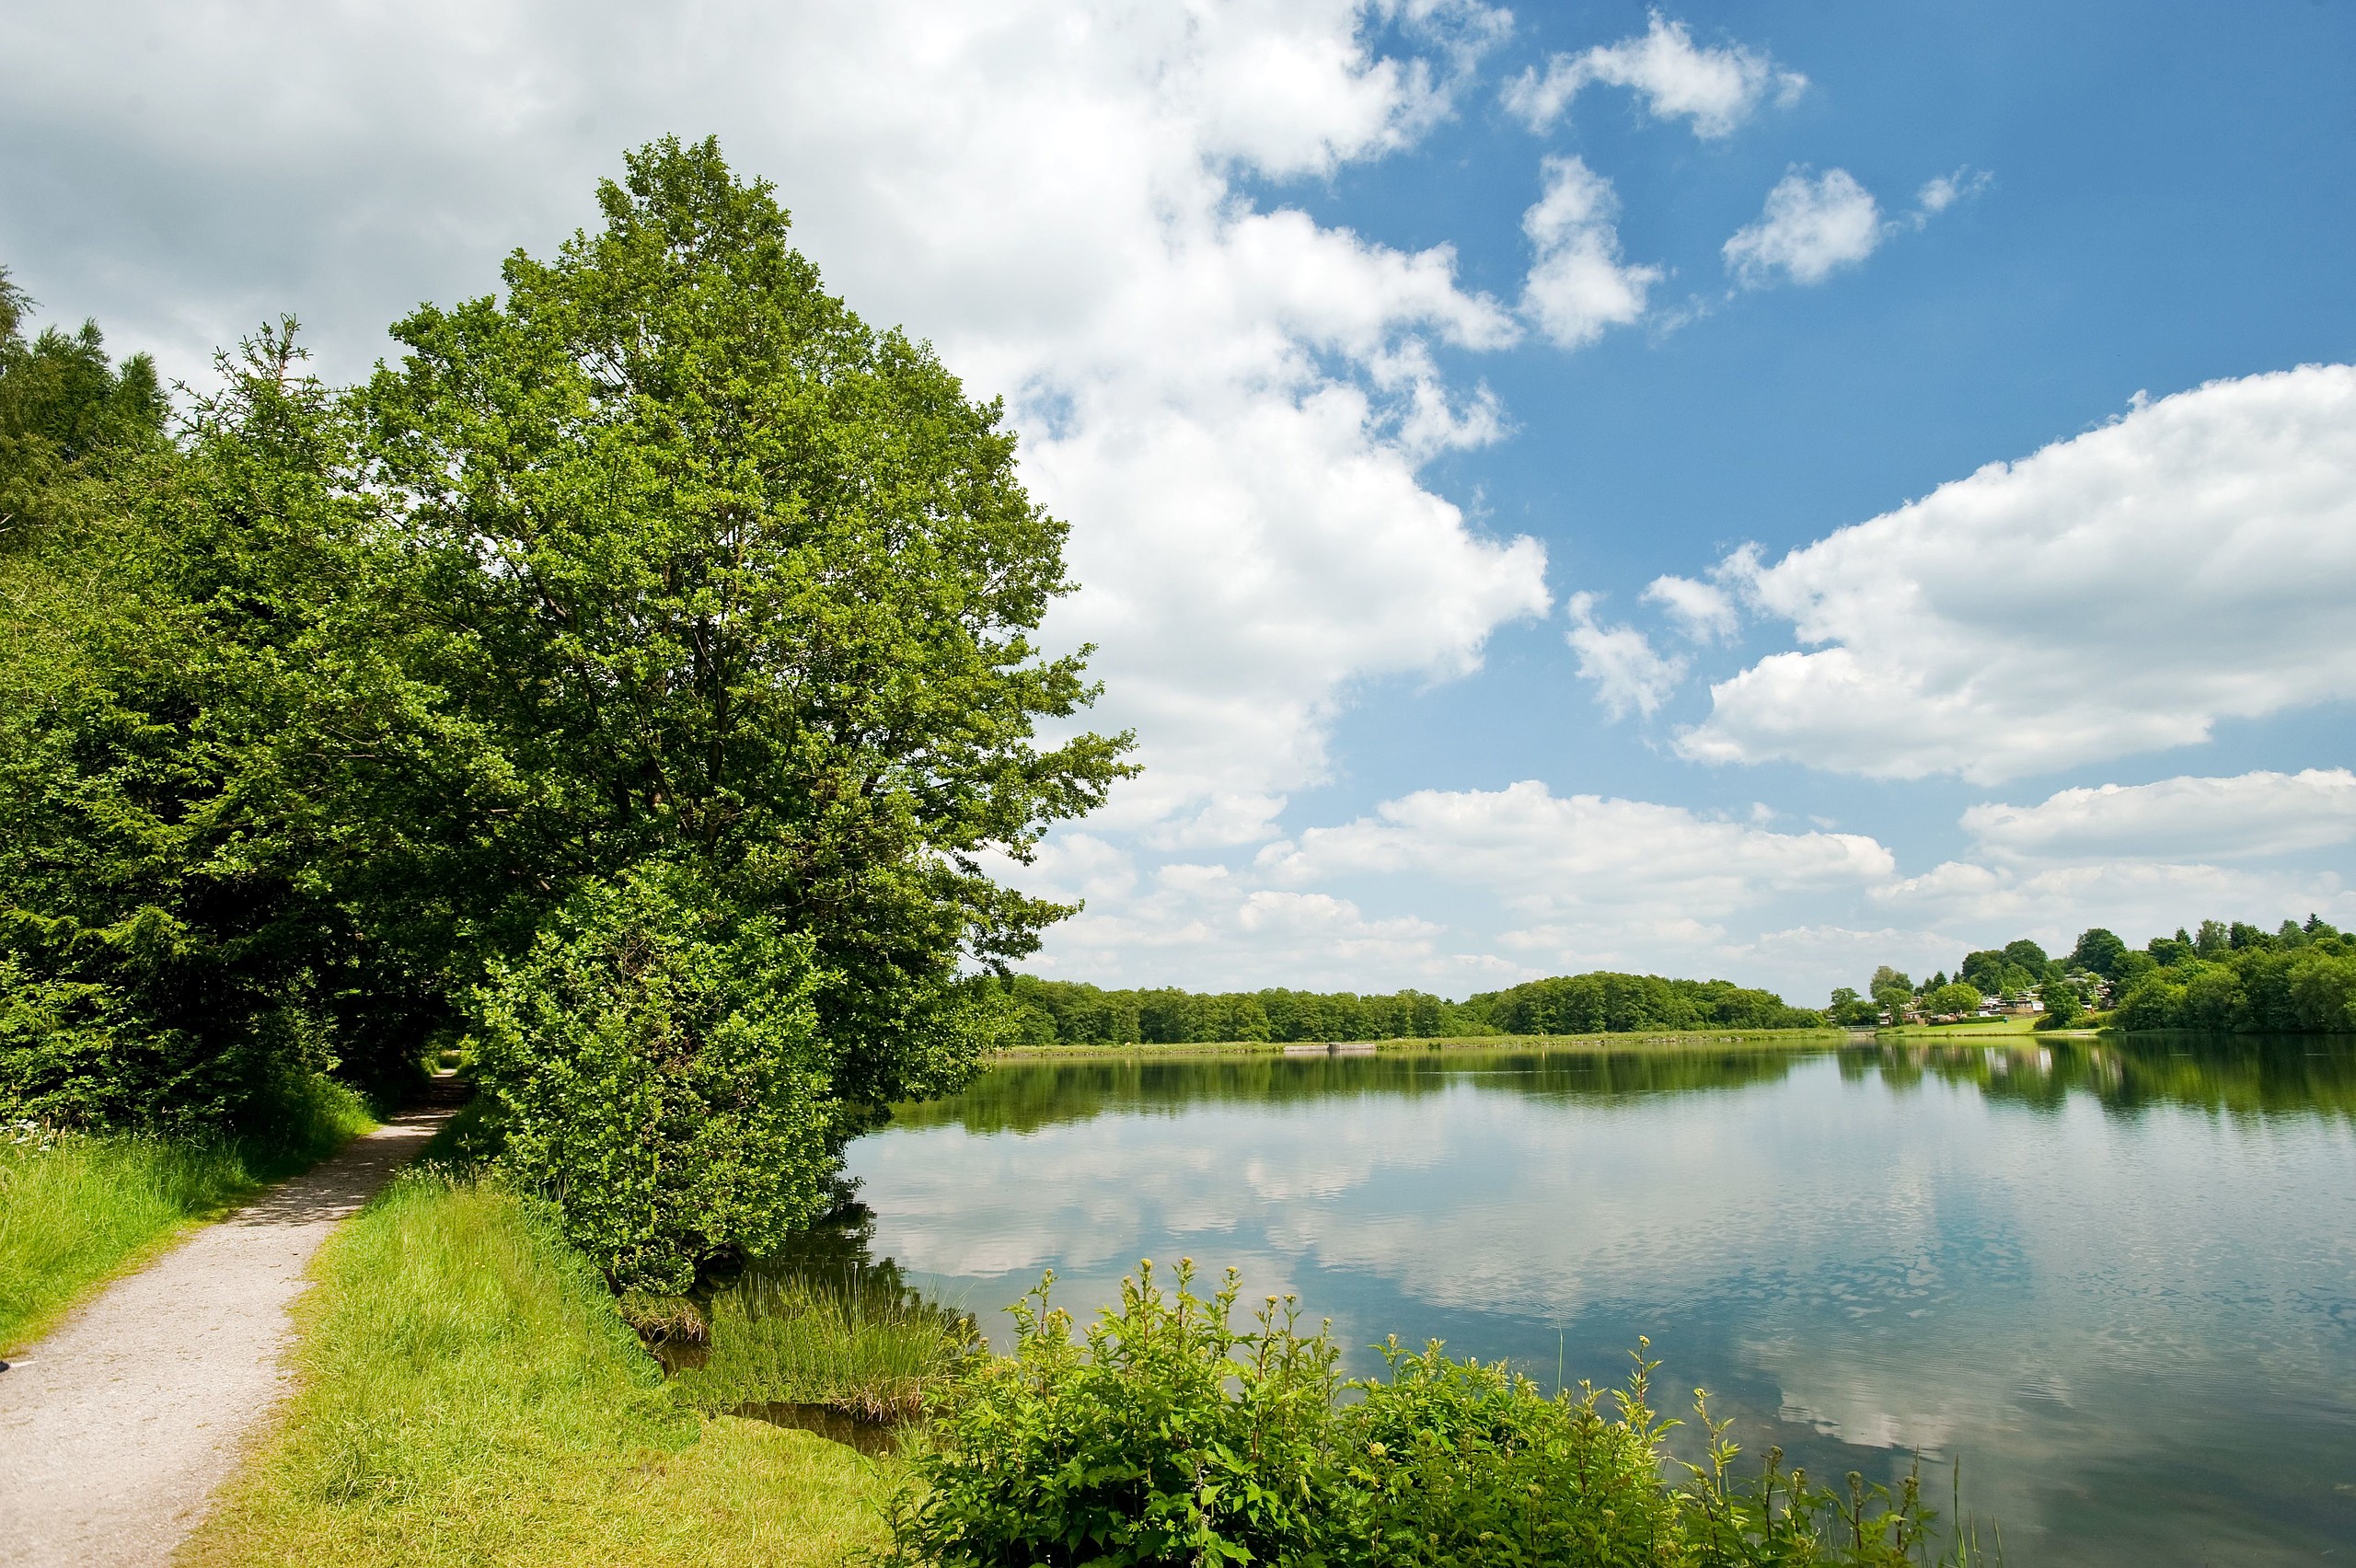 [Translate to English:] View of a lake and trees in the Westerwald